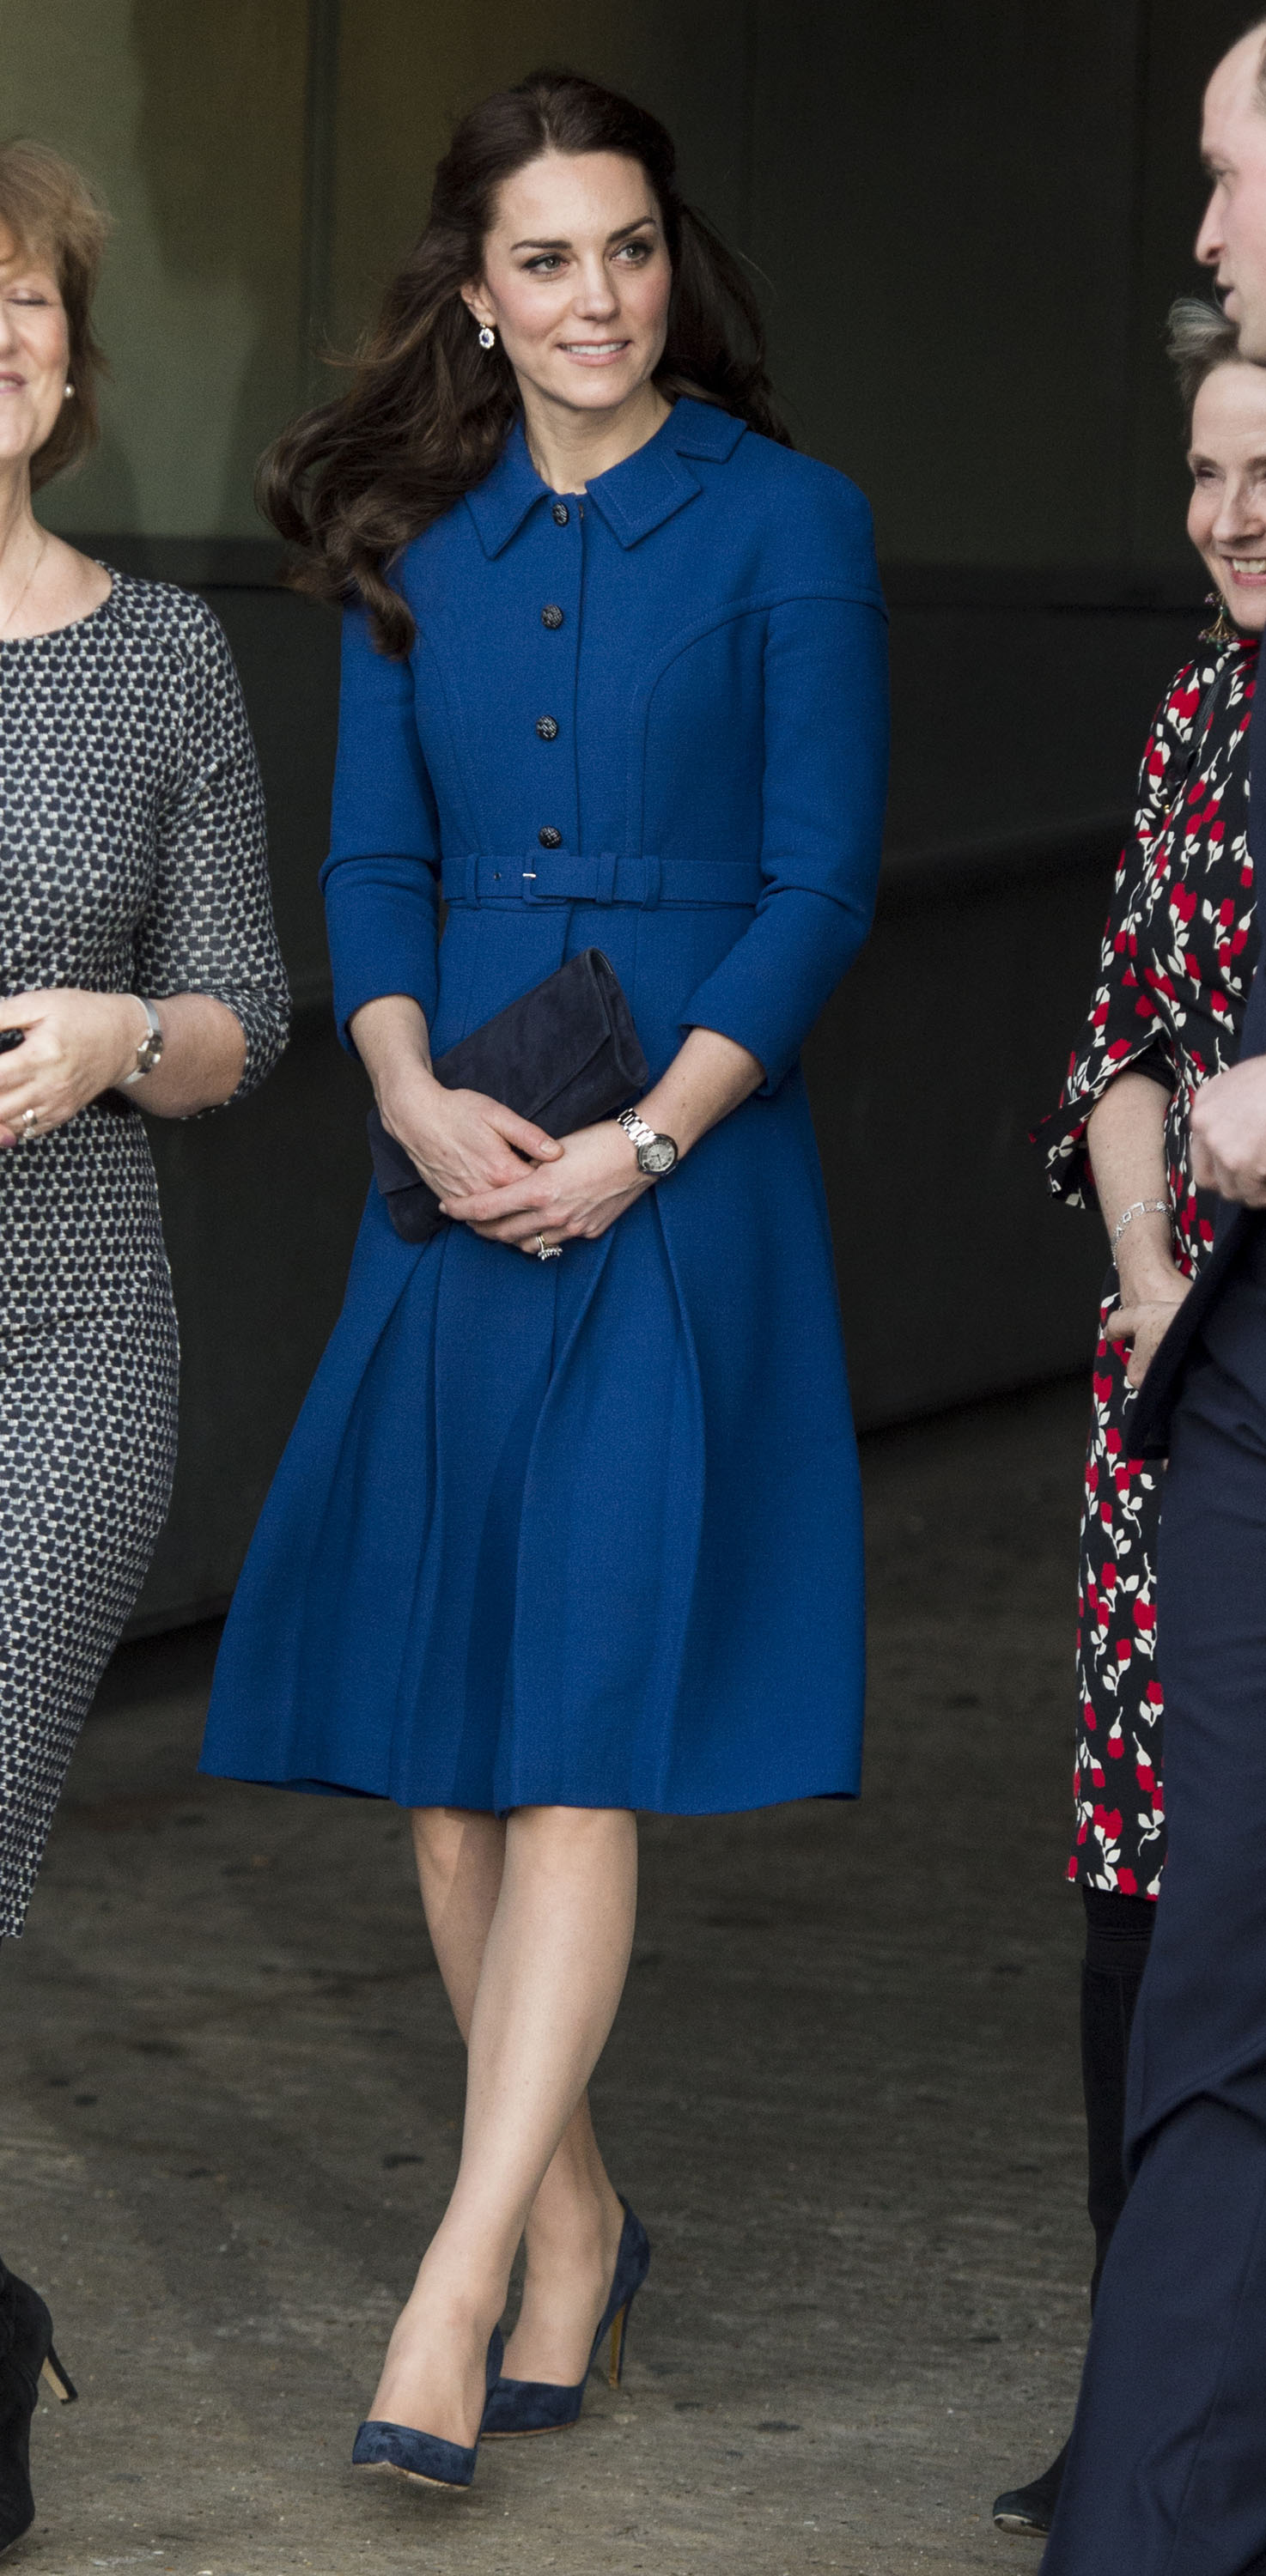 Catherine, Duchess of Cambridge leaves after a visit to the CBUK Stratford in London, England on Jan. 11, 2017.